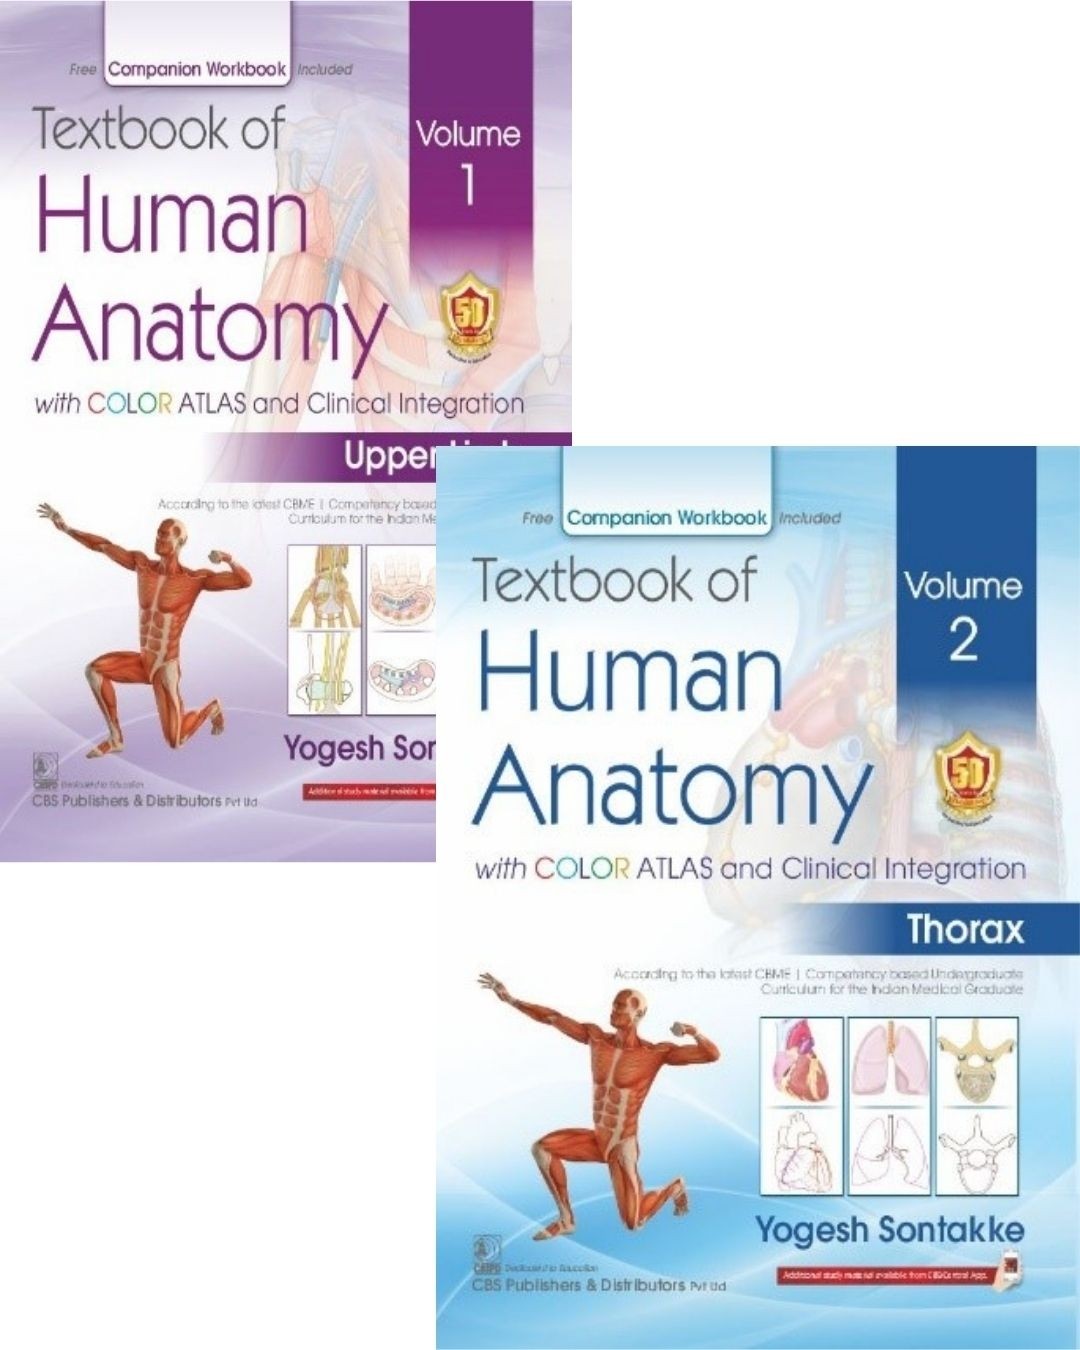 TEXTBOOK OF HUMAN ANATOMY WITH COLOR ATLAS AND CLINICAL INTEGRATION 2 VOL SET (VOL 1- UPPER LIMB VOL 2 - THORAX) WITH COMPANION WORKBOOK